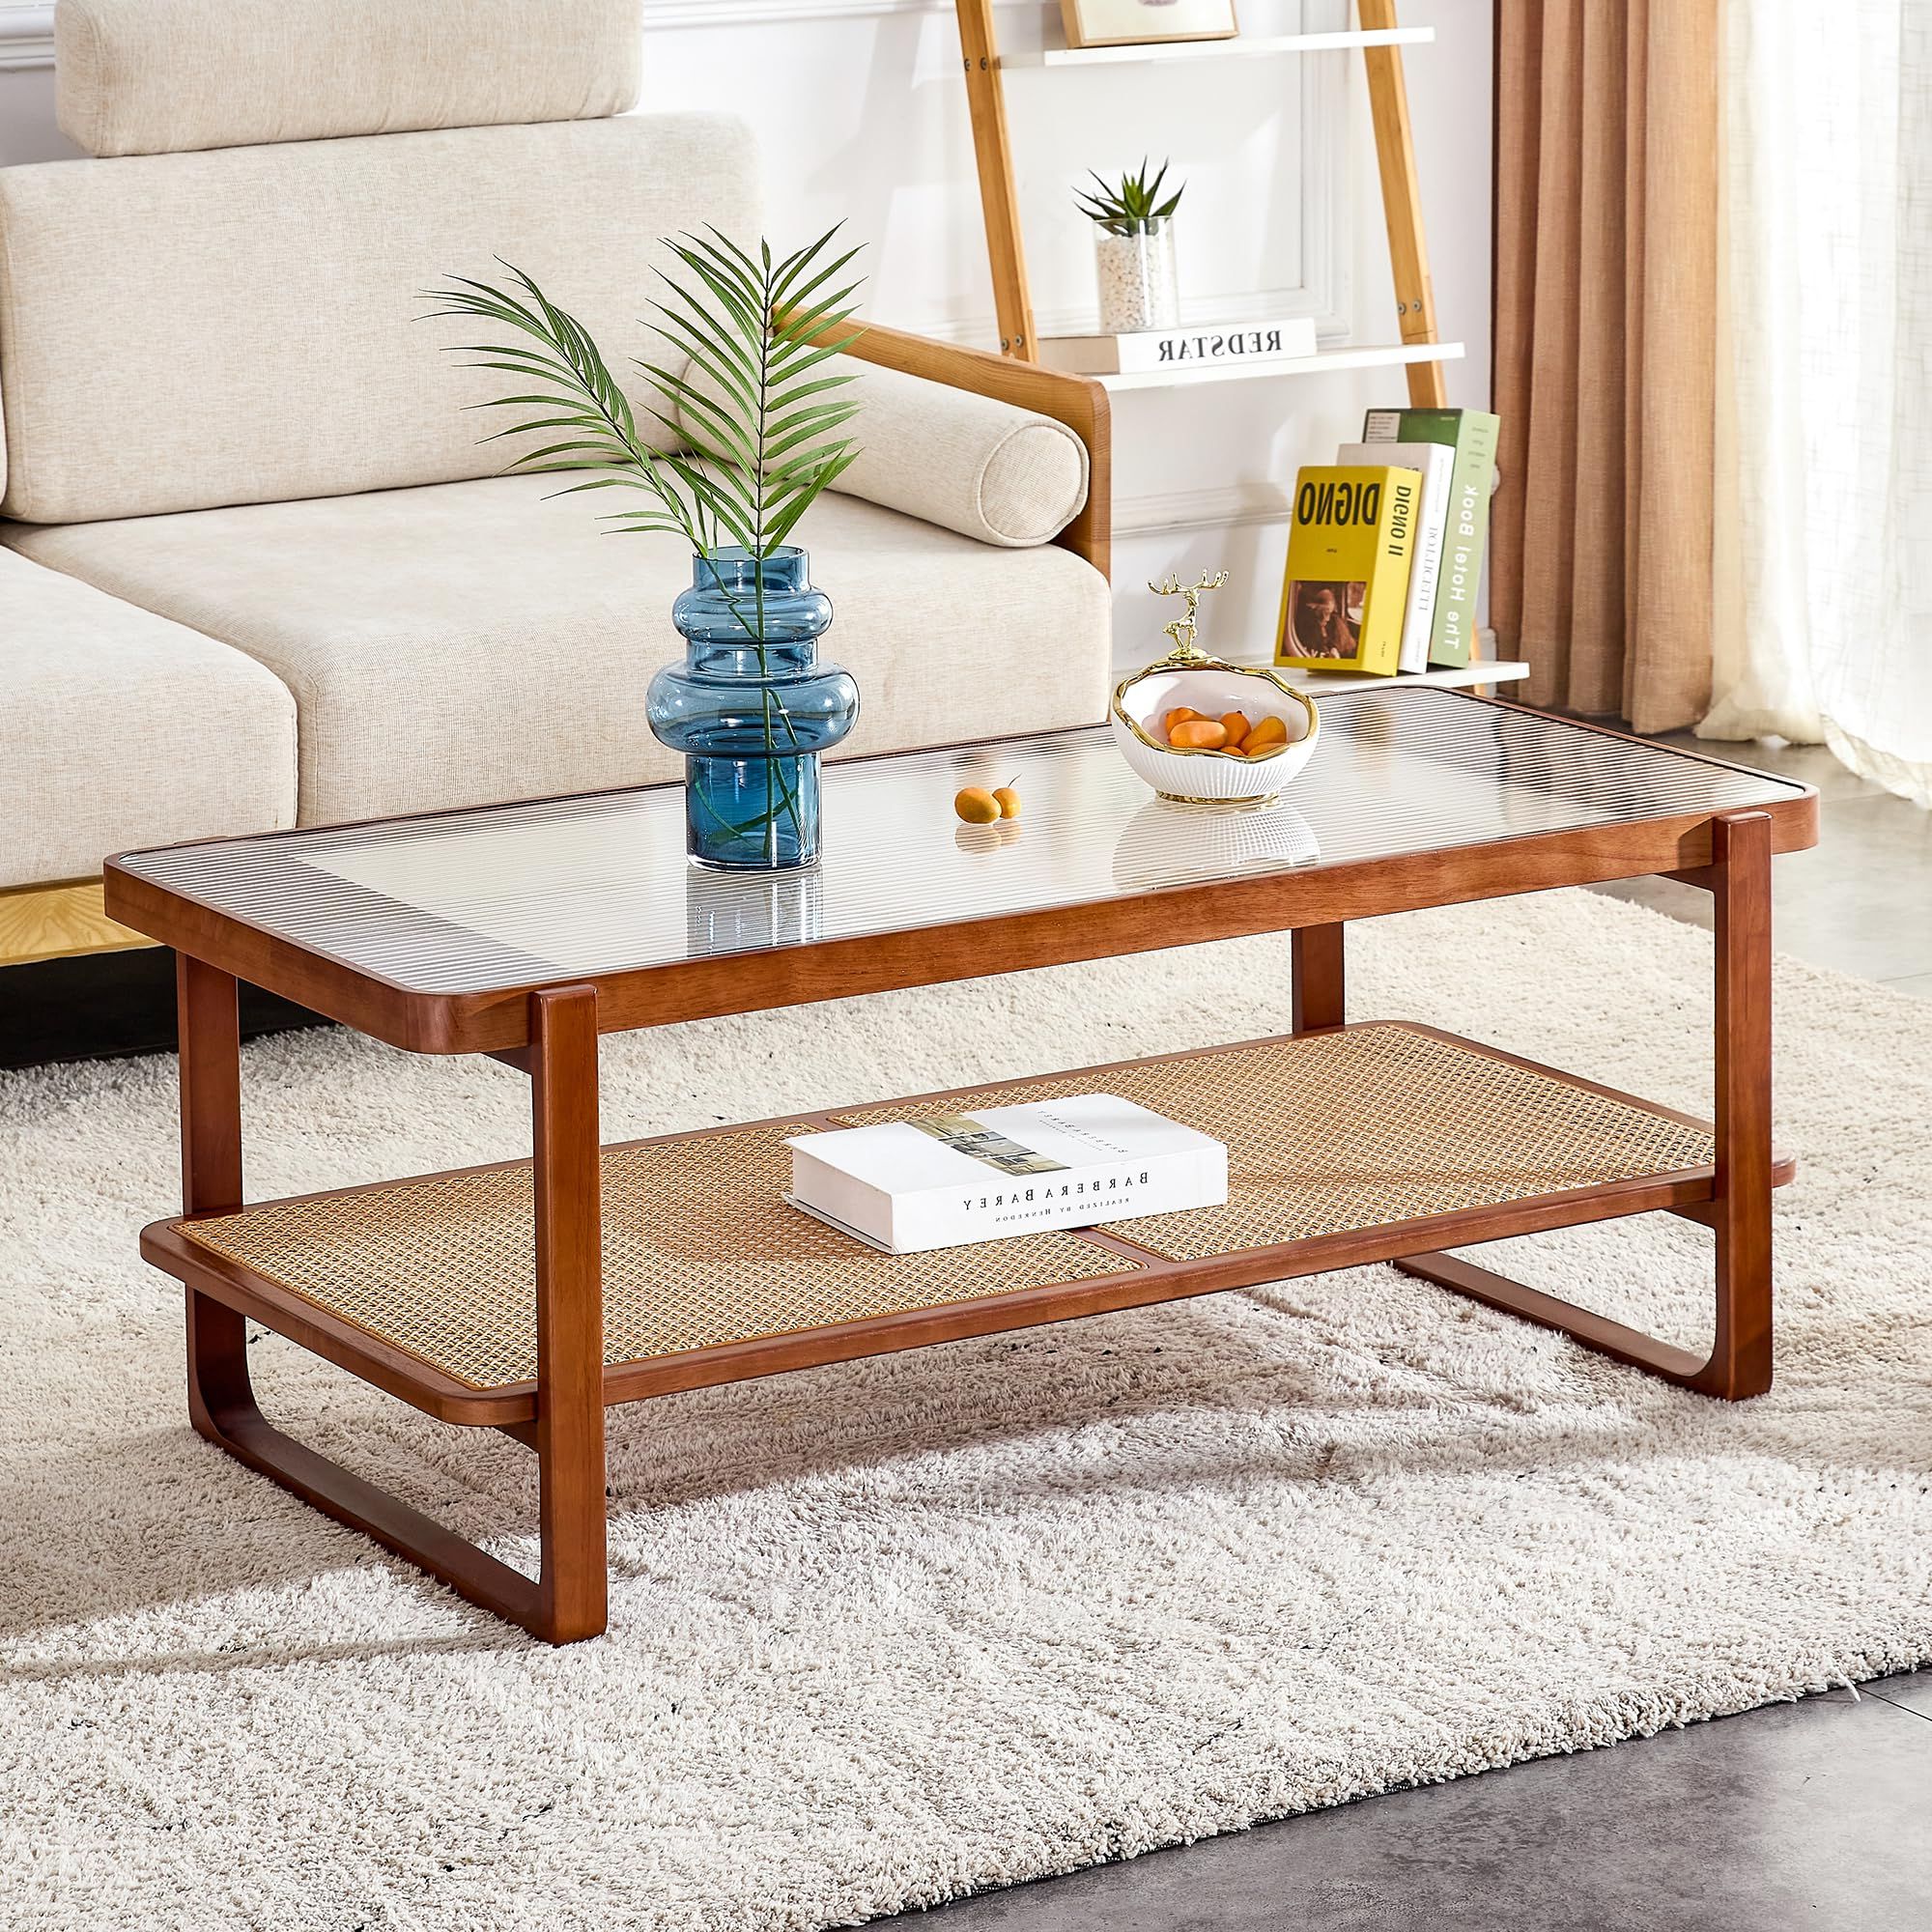 2019 Mid Century Modern Coffee Tables Inside Amazon: Ganooly Mid Century Modern Coffee Table With Ribbed Glass Top  And Pe Rattan Storage Shelf, 45 Inch Rectangular Solid Wood Boho Coffe Table,  Unique Center Table For Livinig Room Apartment Small (Photo 5 of 10)